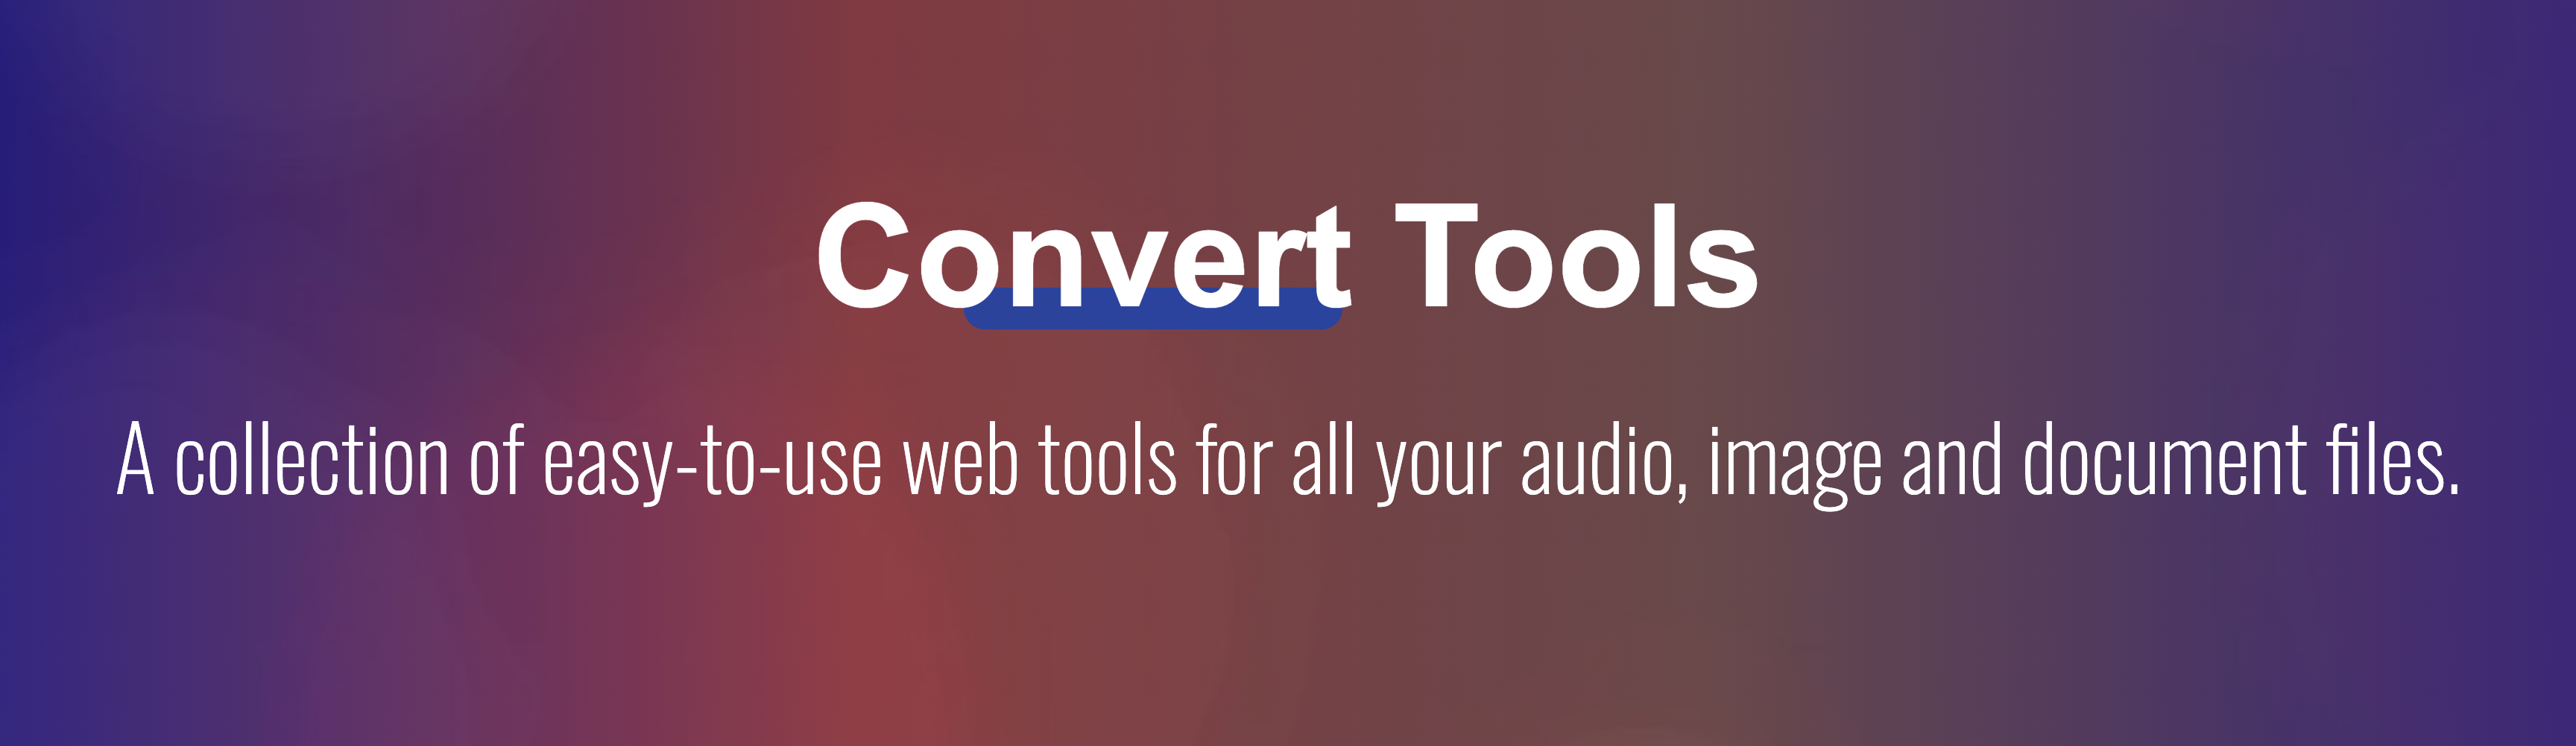 Convert Tools - A collection of easy-to-use web tools for all your audio, image and document files.